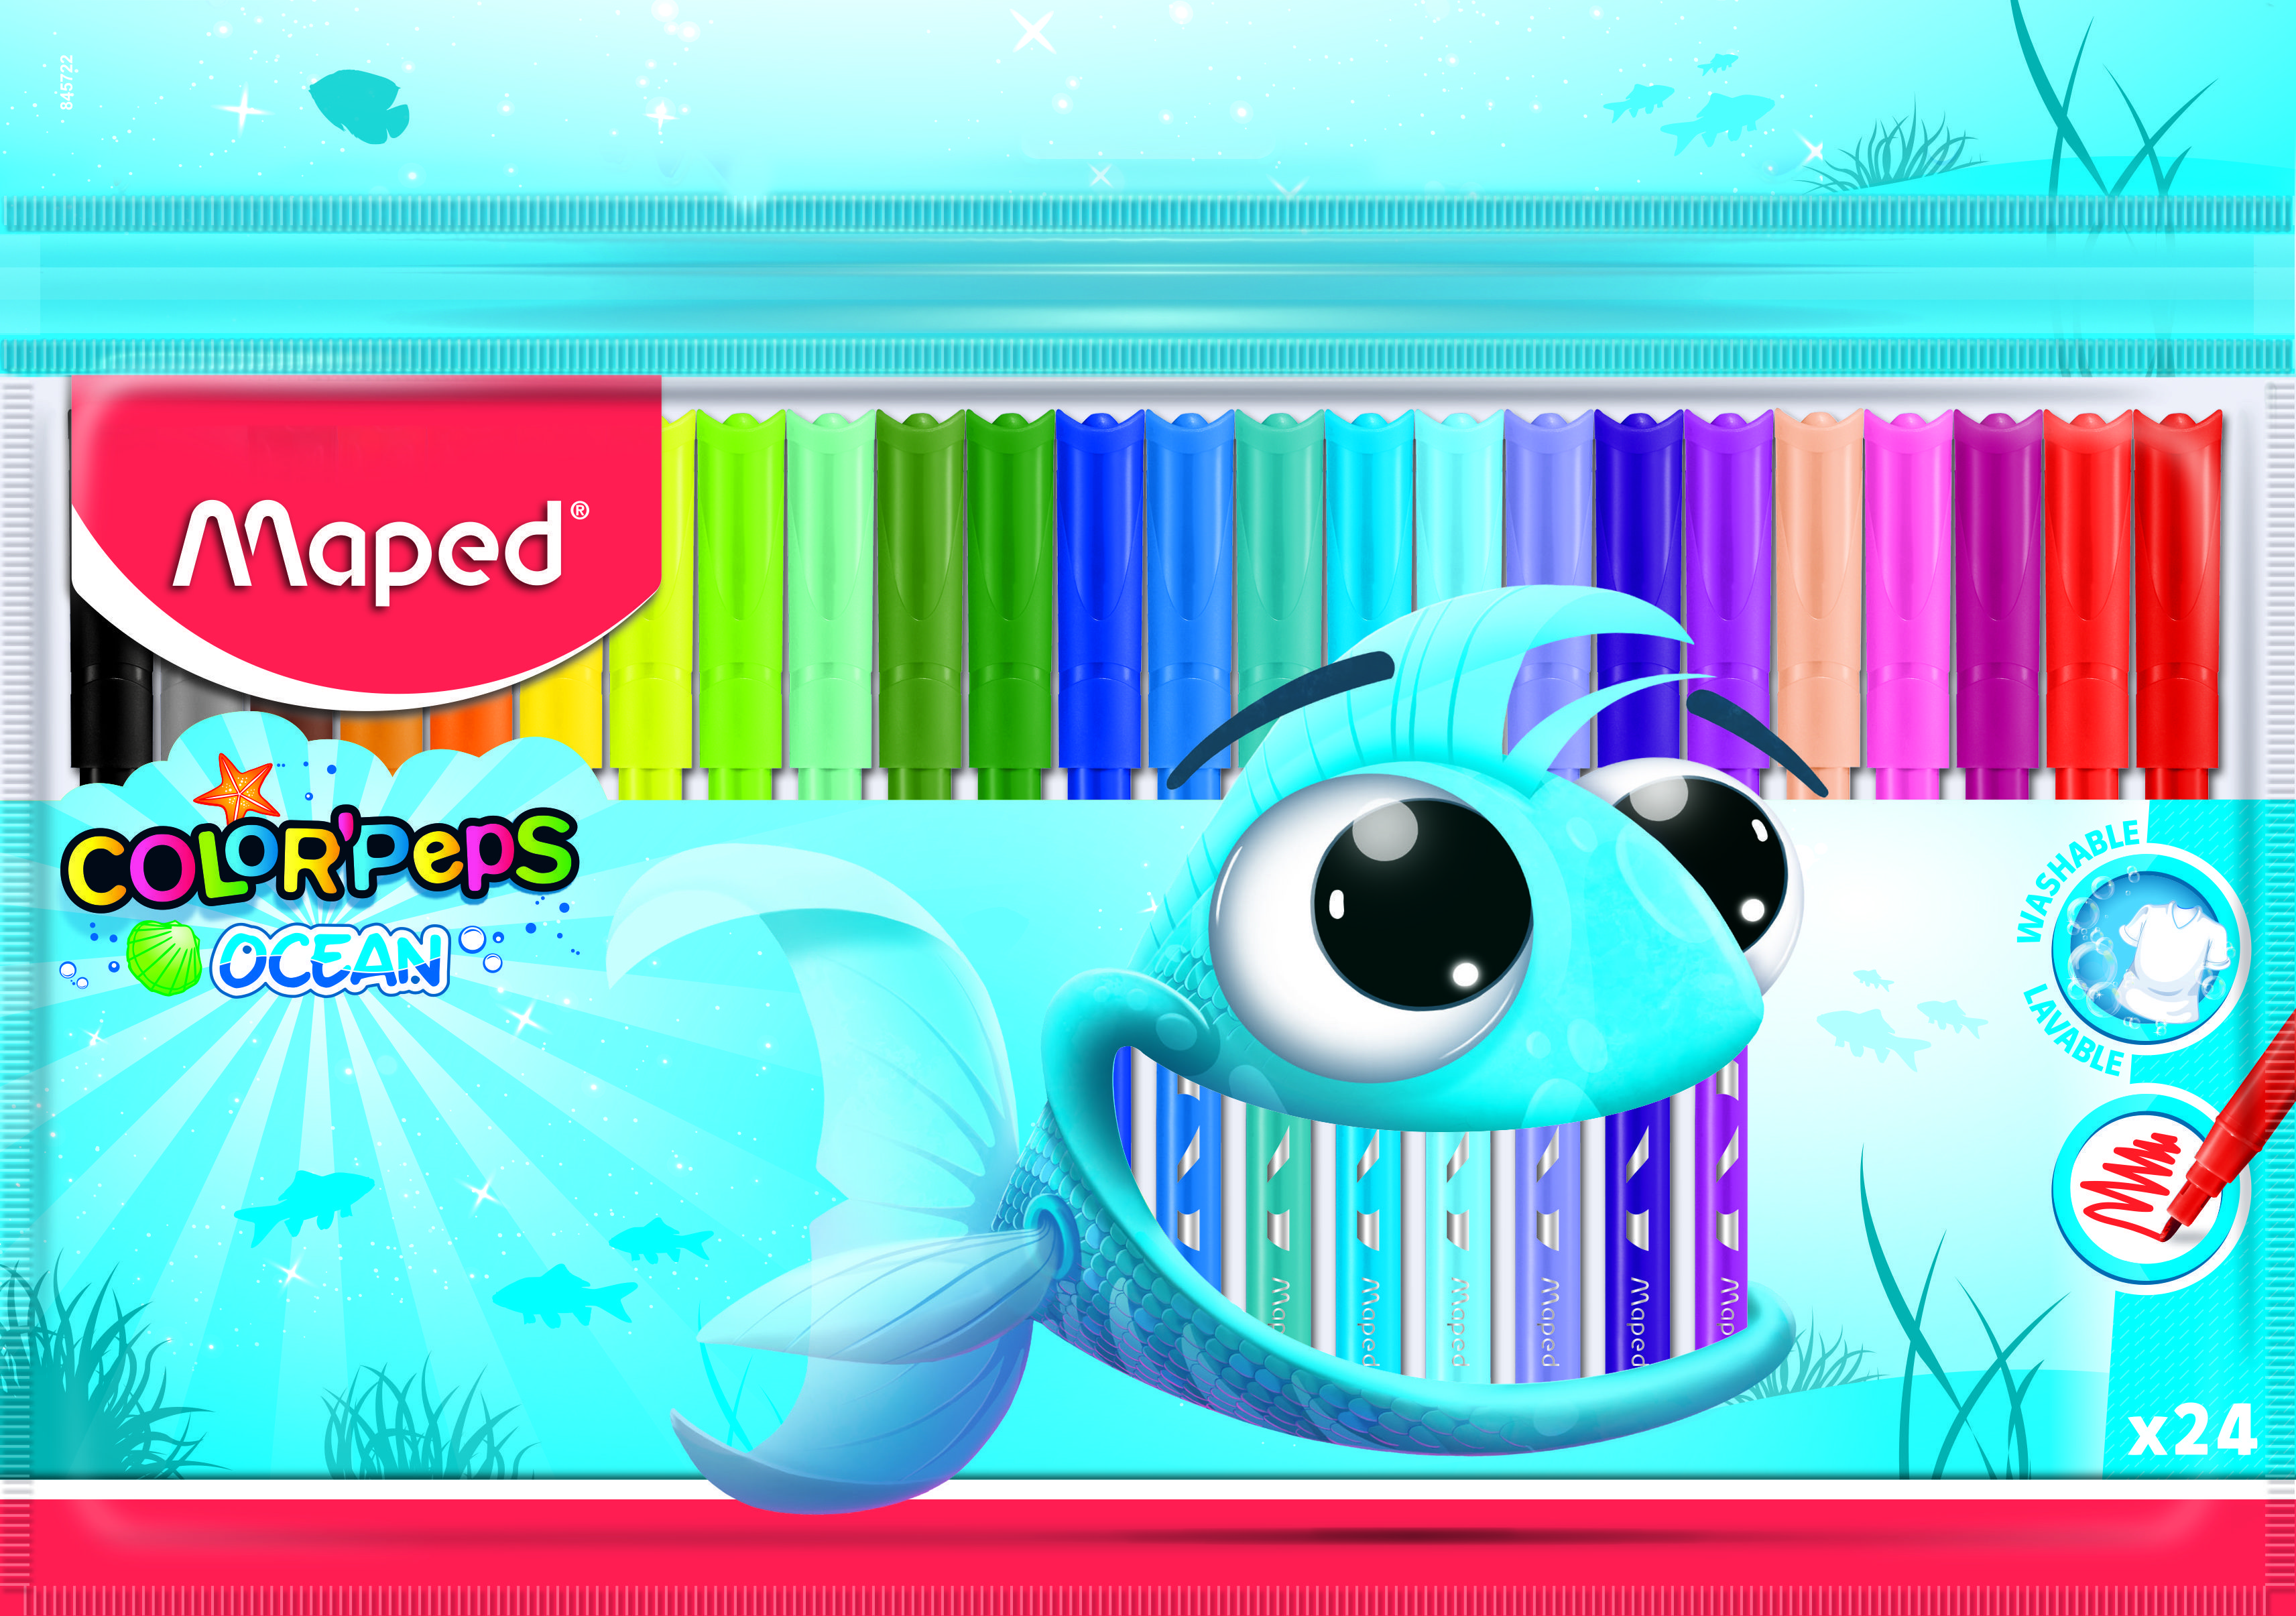  MAPED COLOR'PEPS OCEAN     -   ,    24  